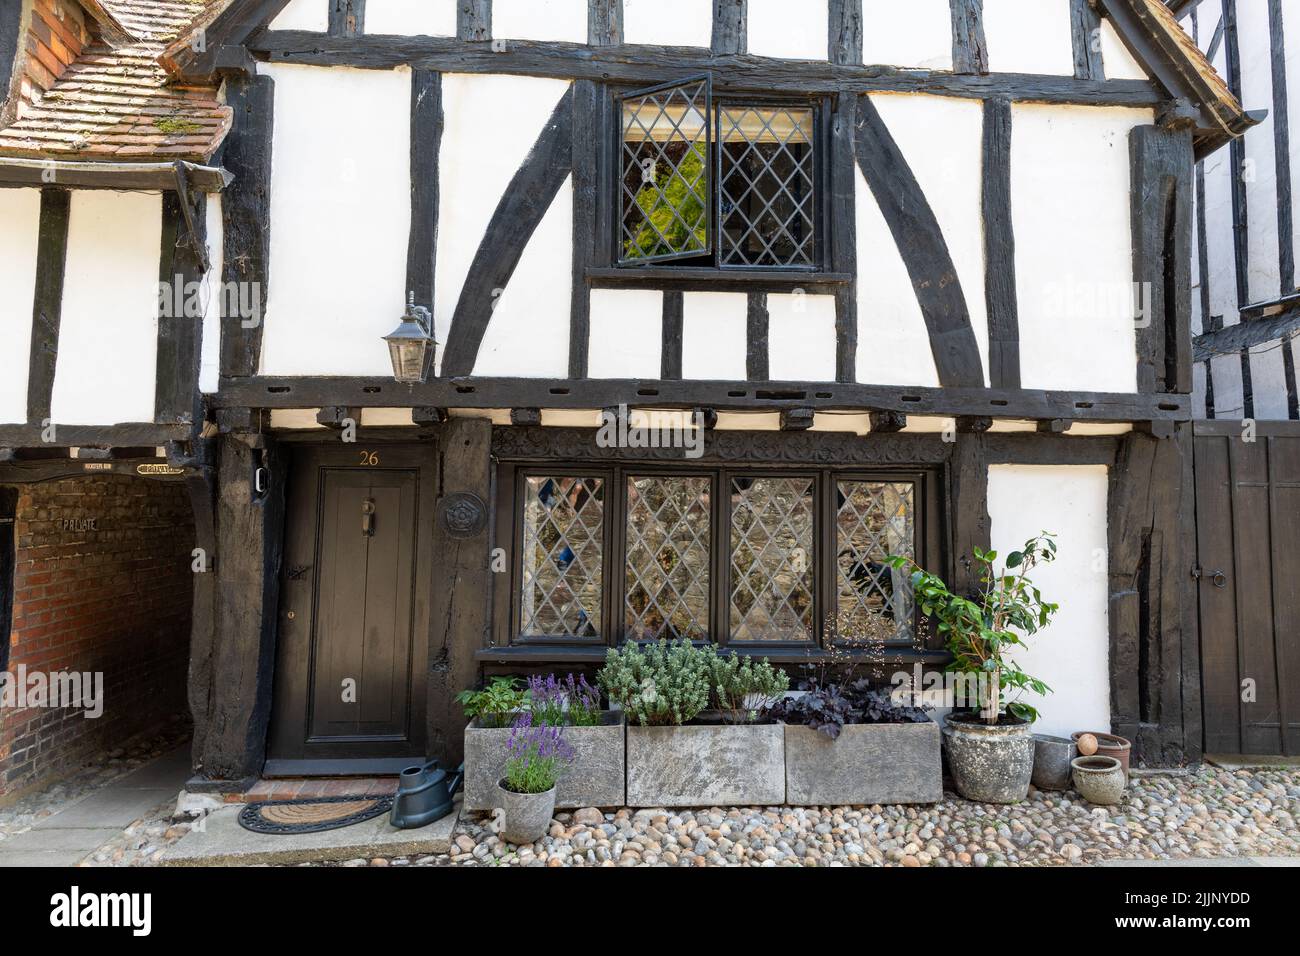 Medieval Architecture In Rye UK Stock Photo